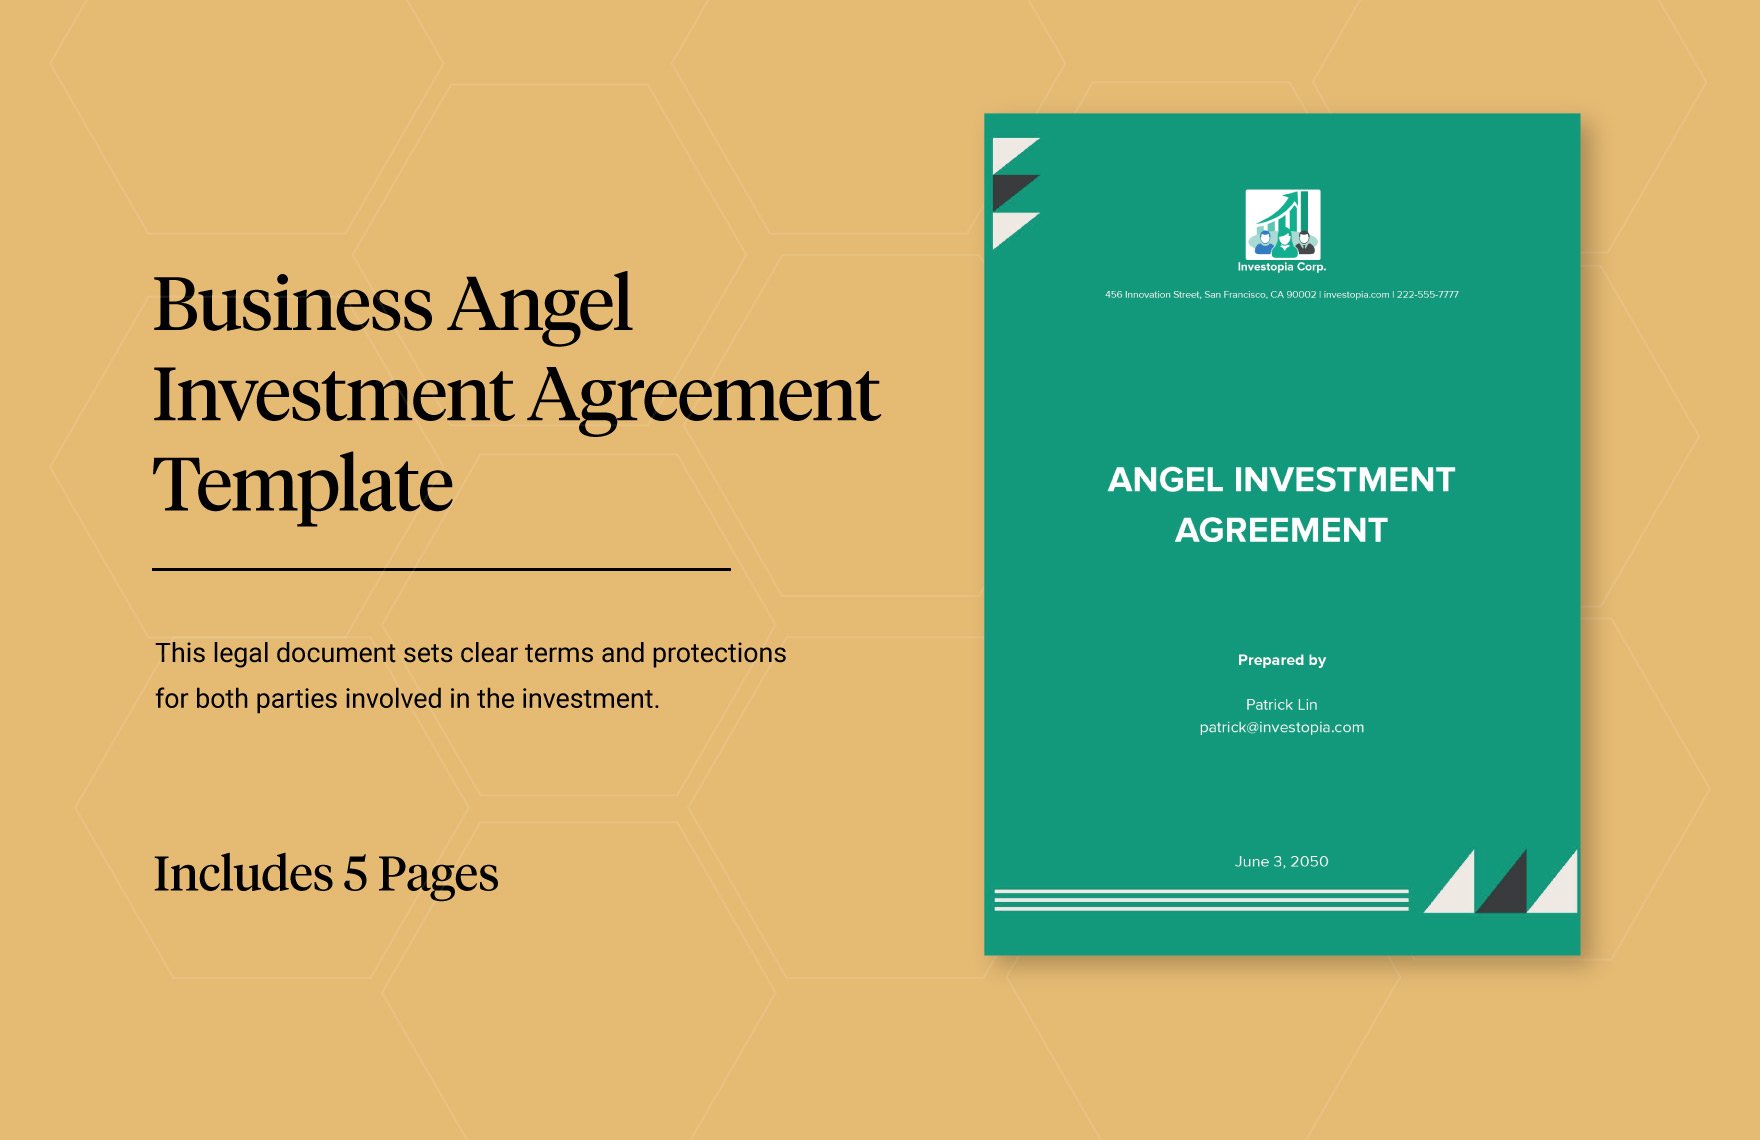 Business Angel Investment Agreement Template